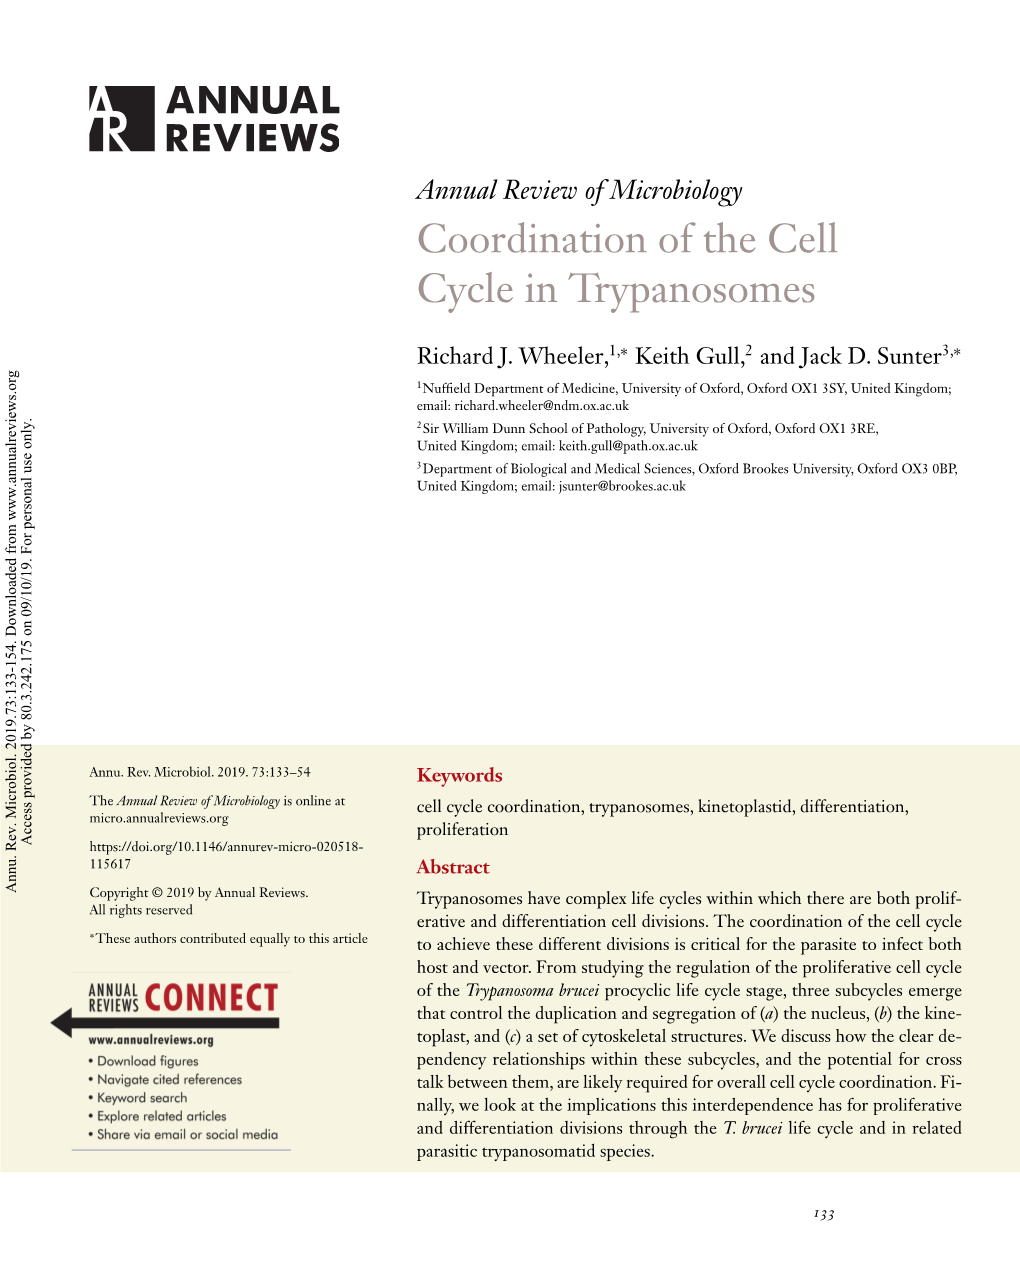 Coordination of the Cell Cycle in Trypanosomes